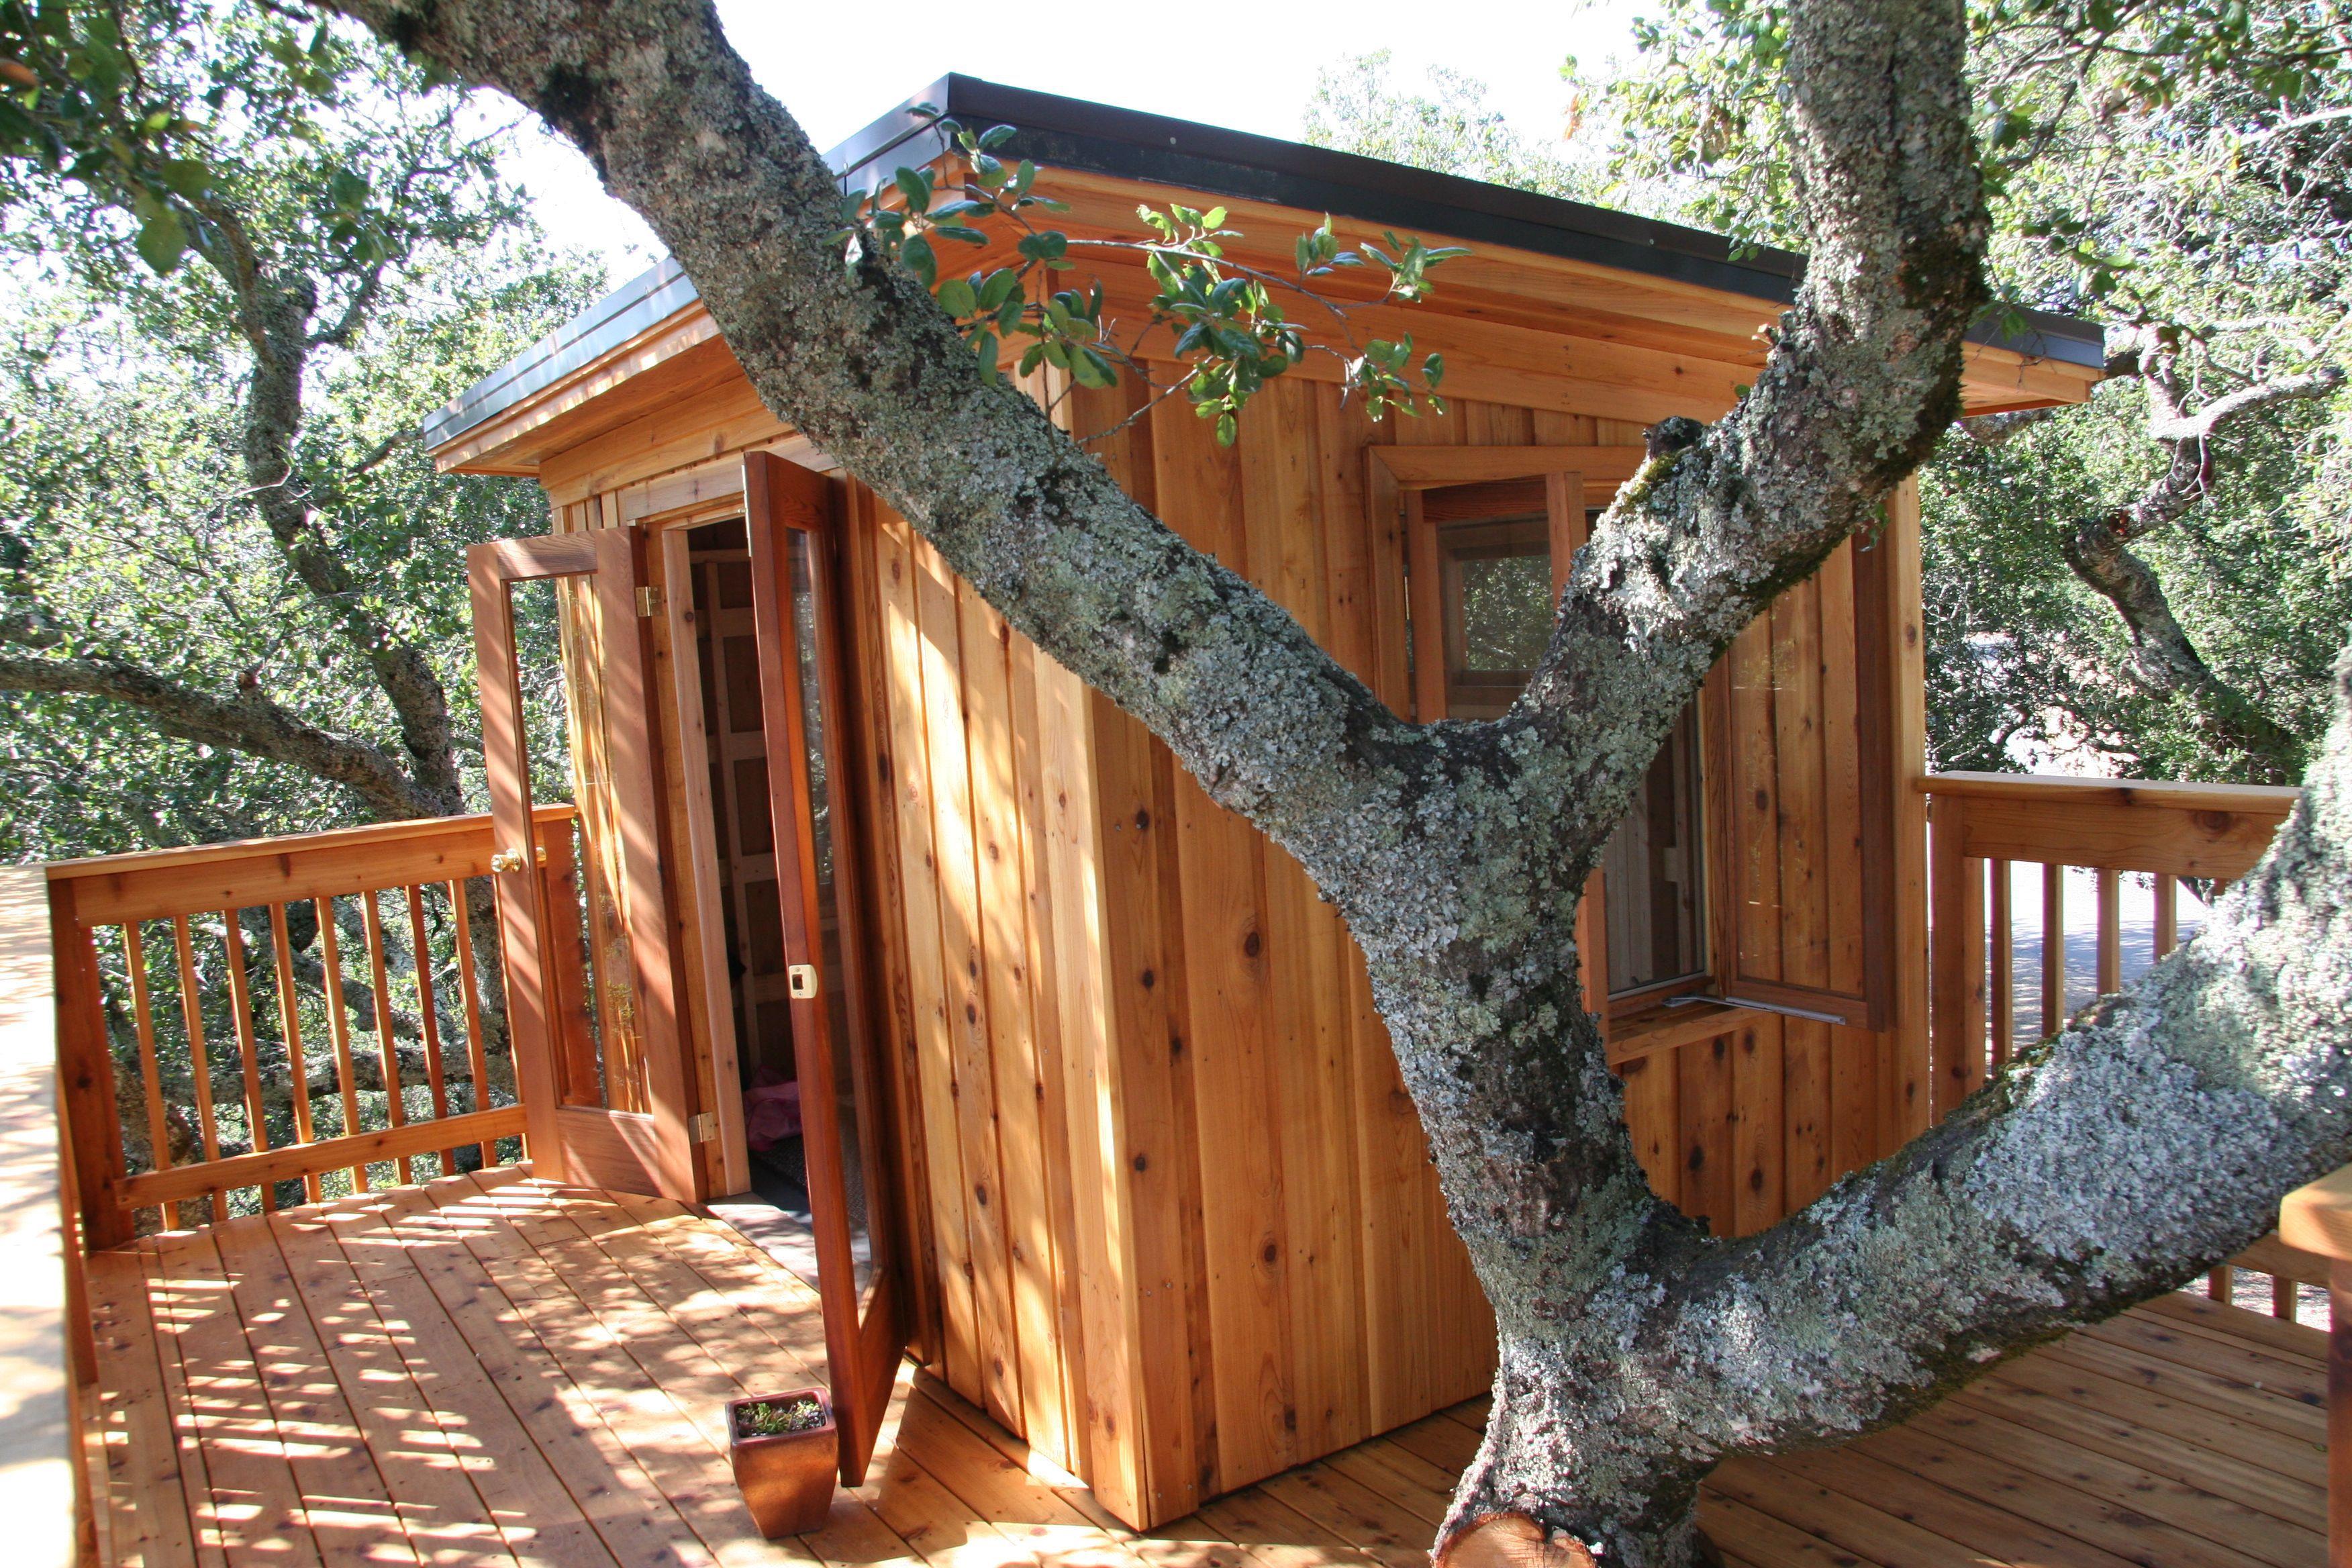 Cedar Urban Studio Shed 7x10 with French double doors in Santa Rosa, California. ID number 166110-1